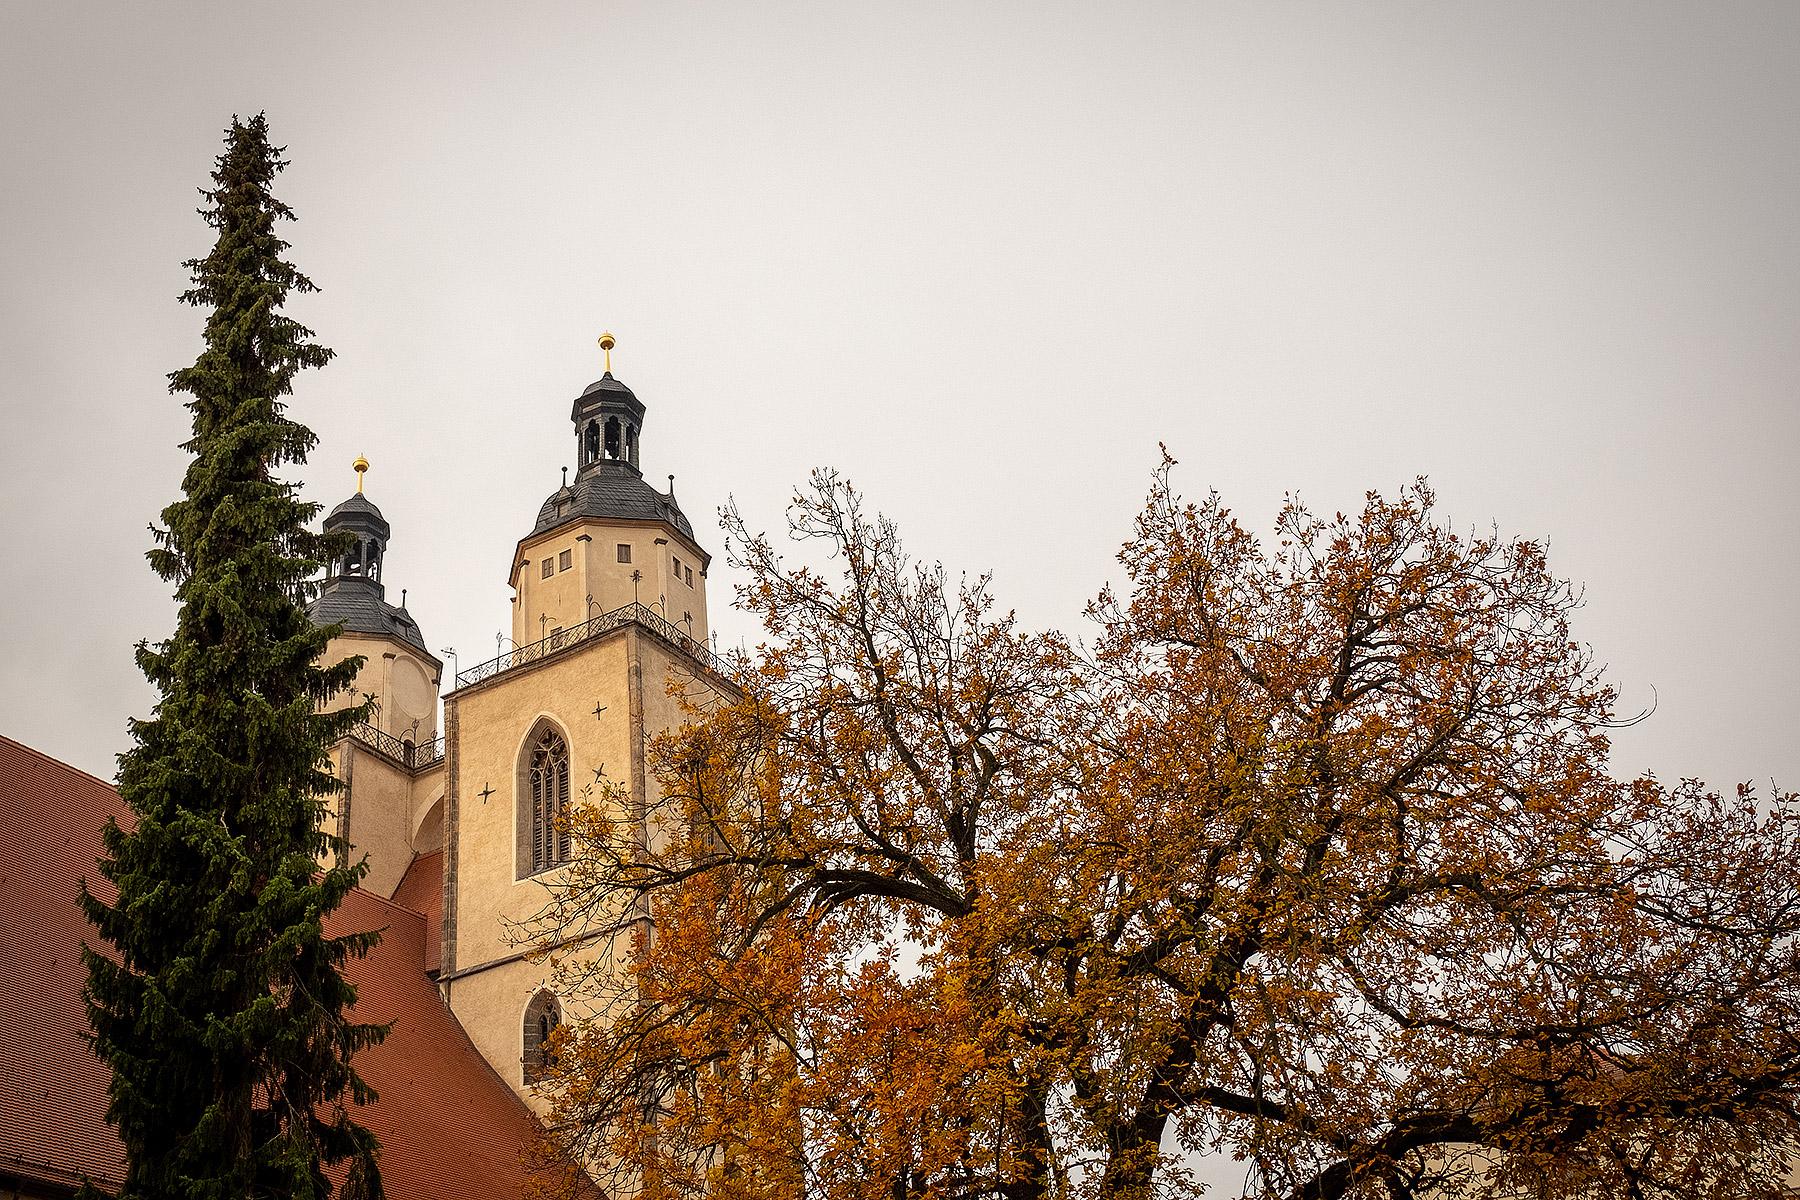 The City Church in Wittenberg where Martin Luther and other reformers preached regularly. All photos: LWF/A. Danielsson  